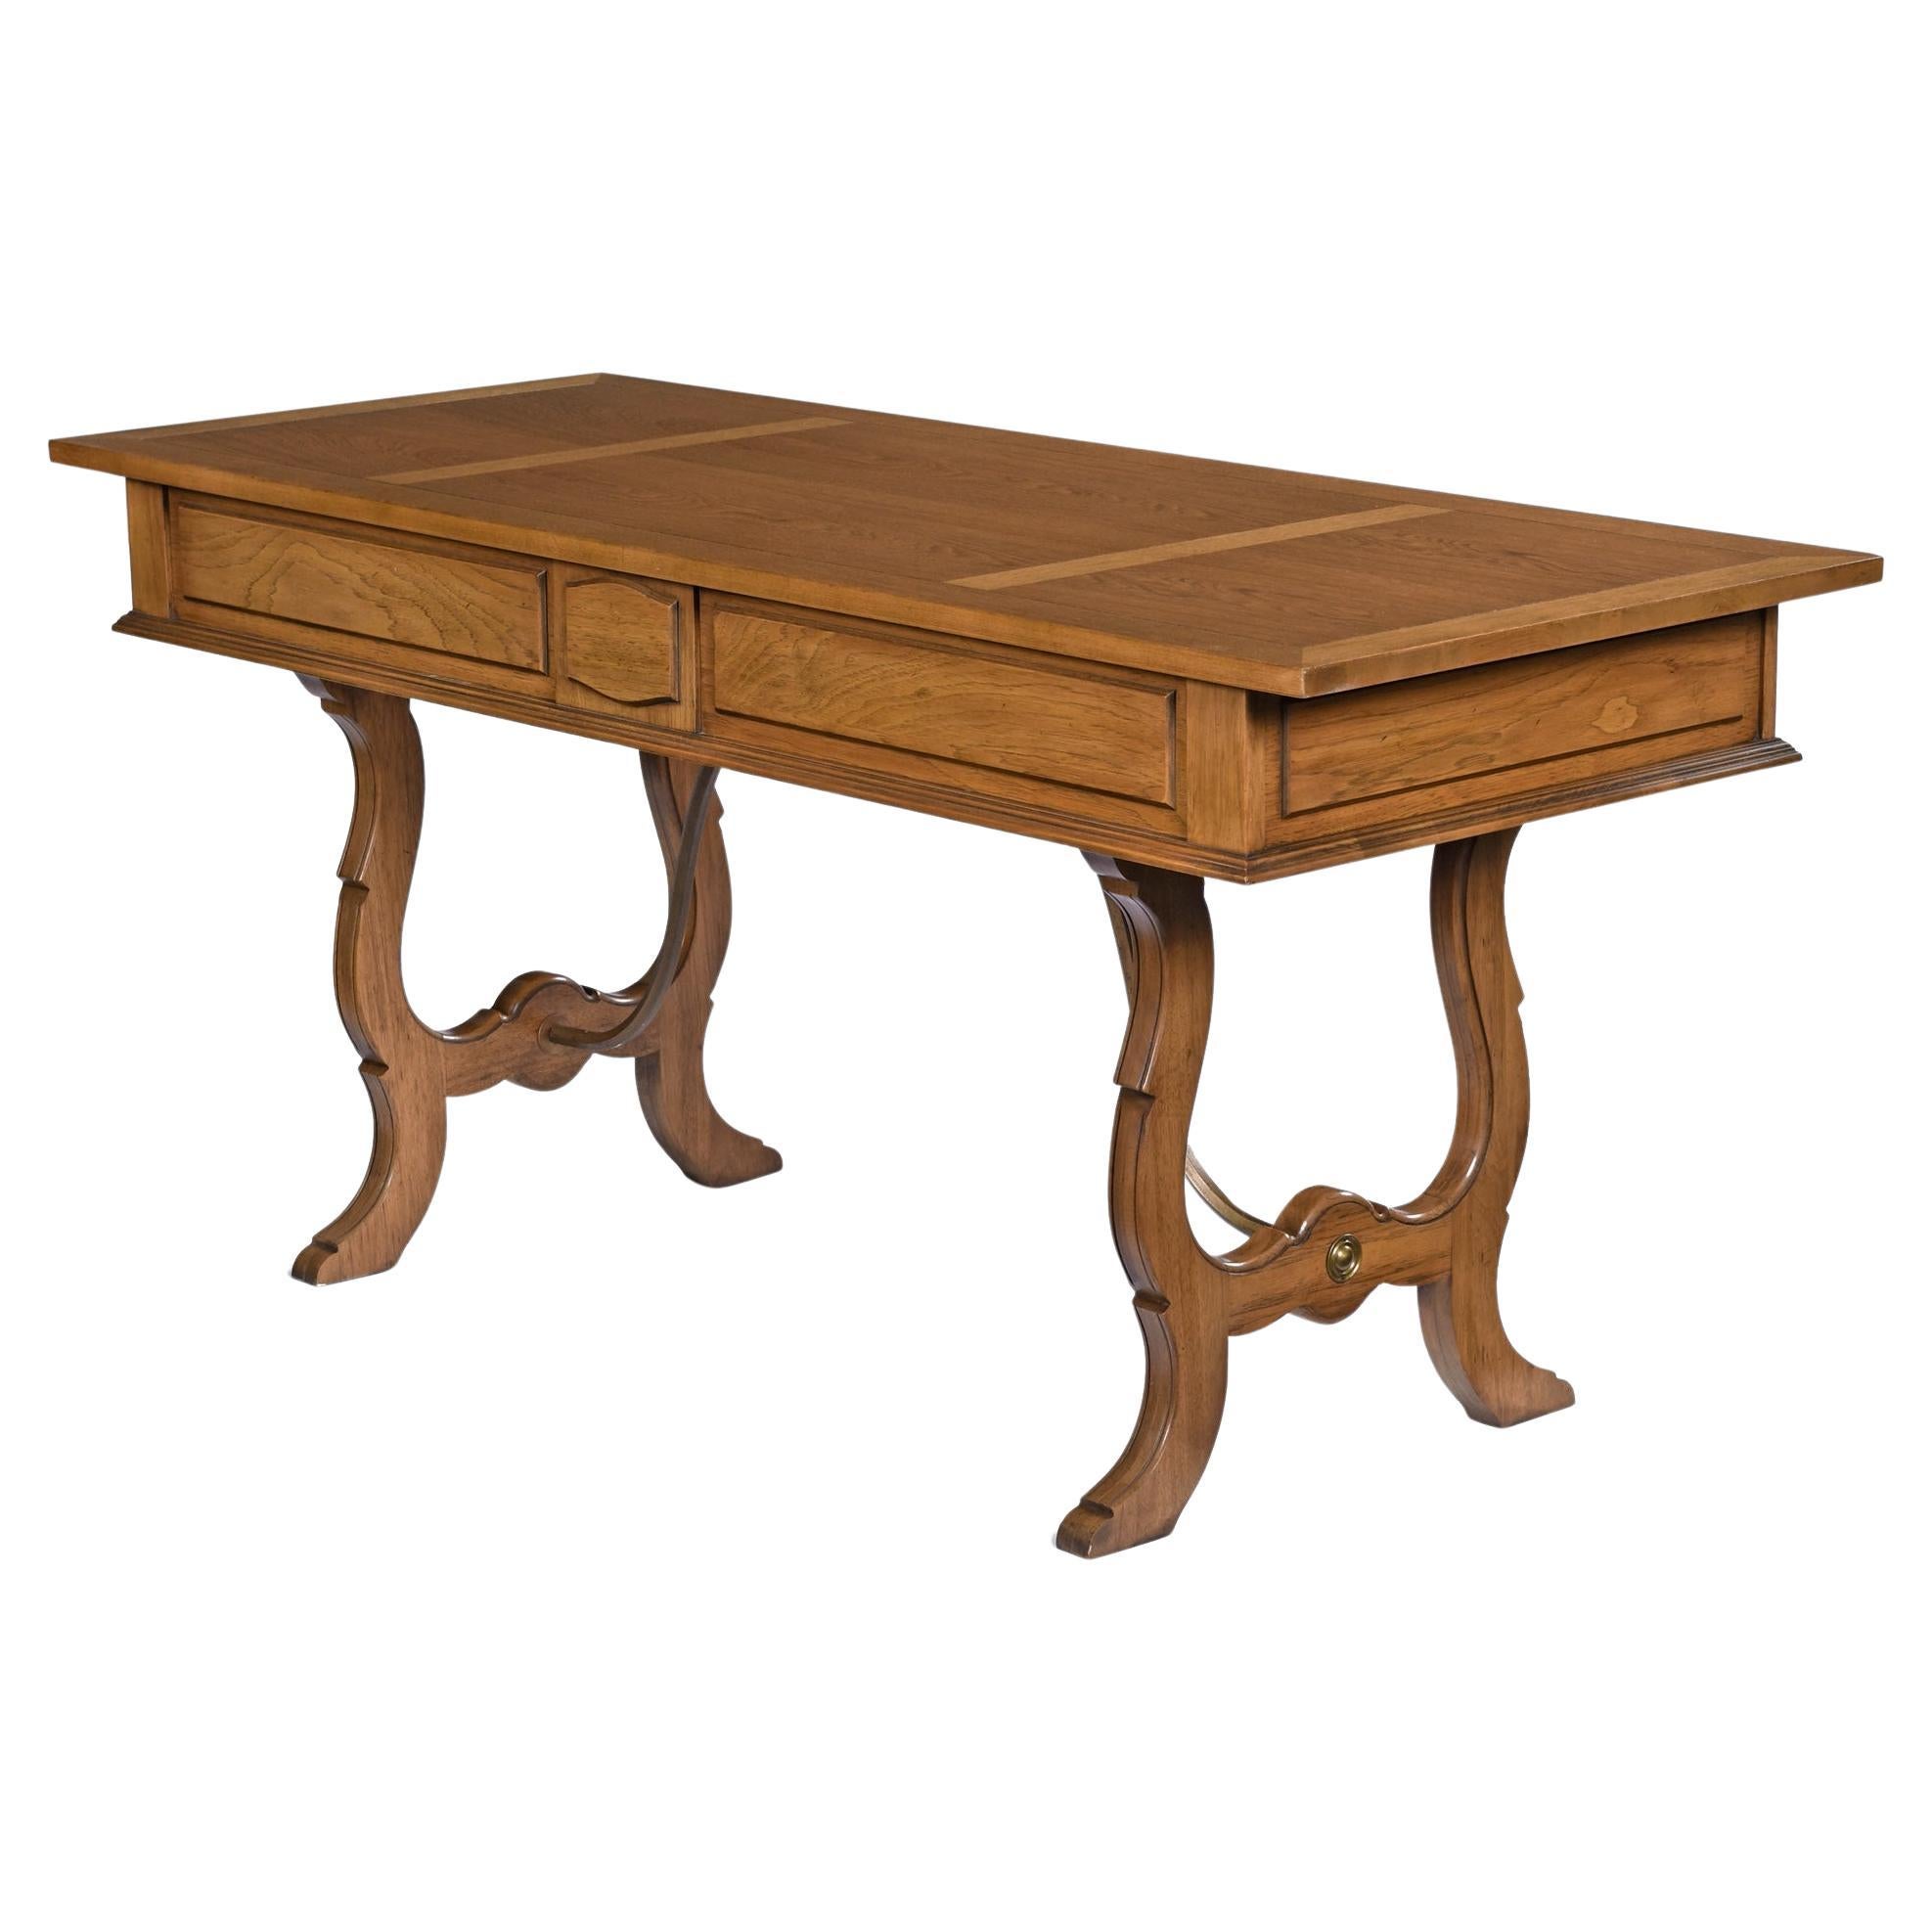 Mid-20th Century 1960's English Regency Style Pecan Desk Console by Thomasville For Sale